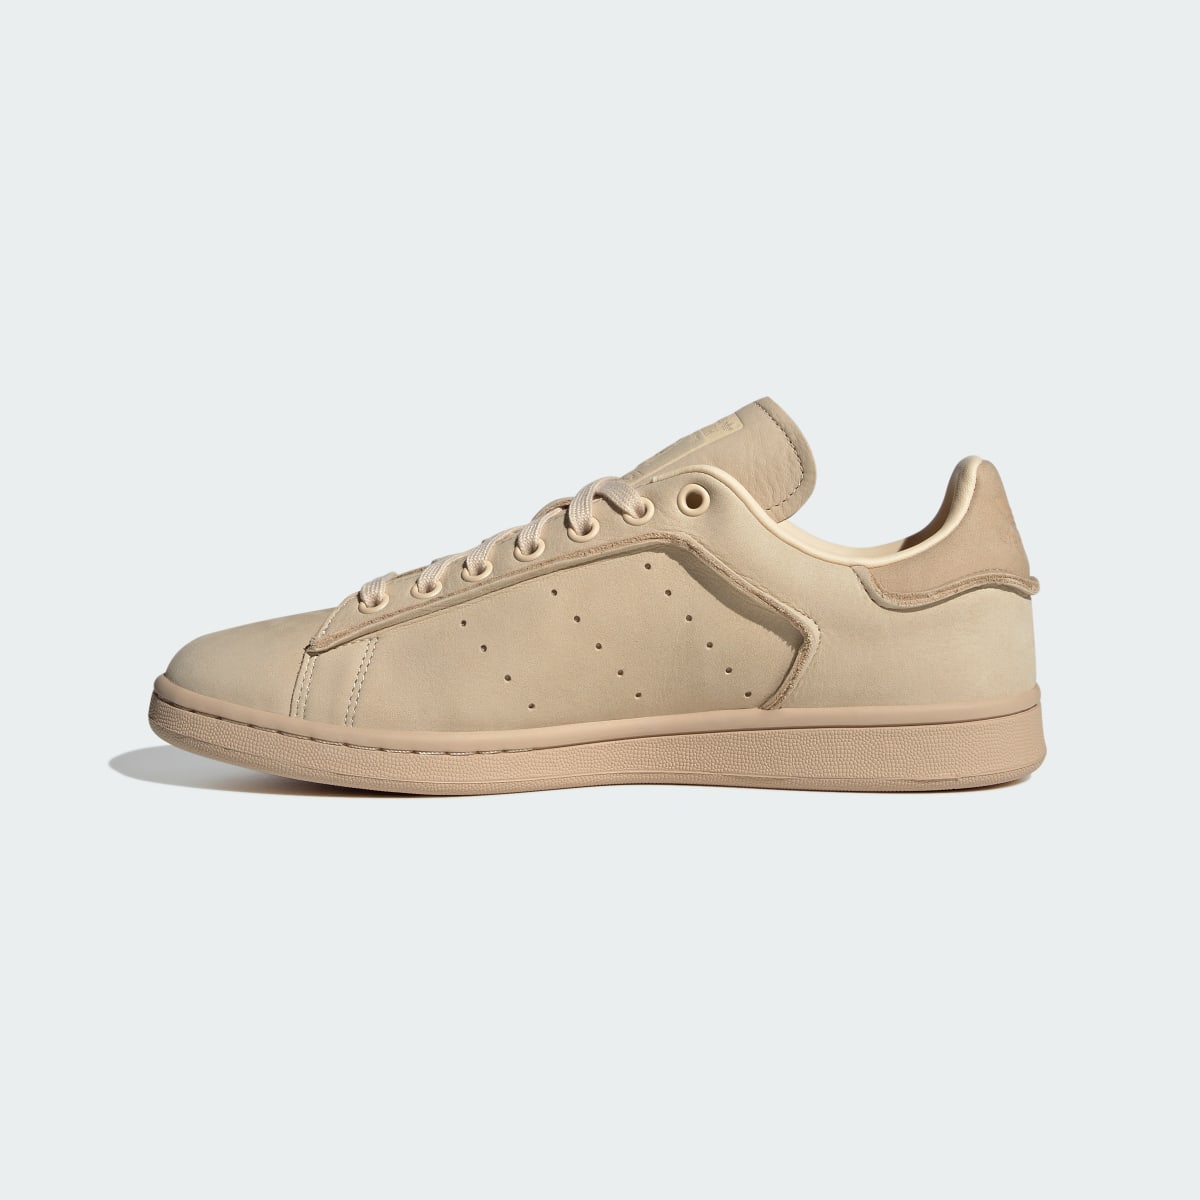 Adidas Stan Smith Luxe Shoes. 7